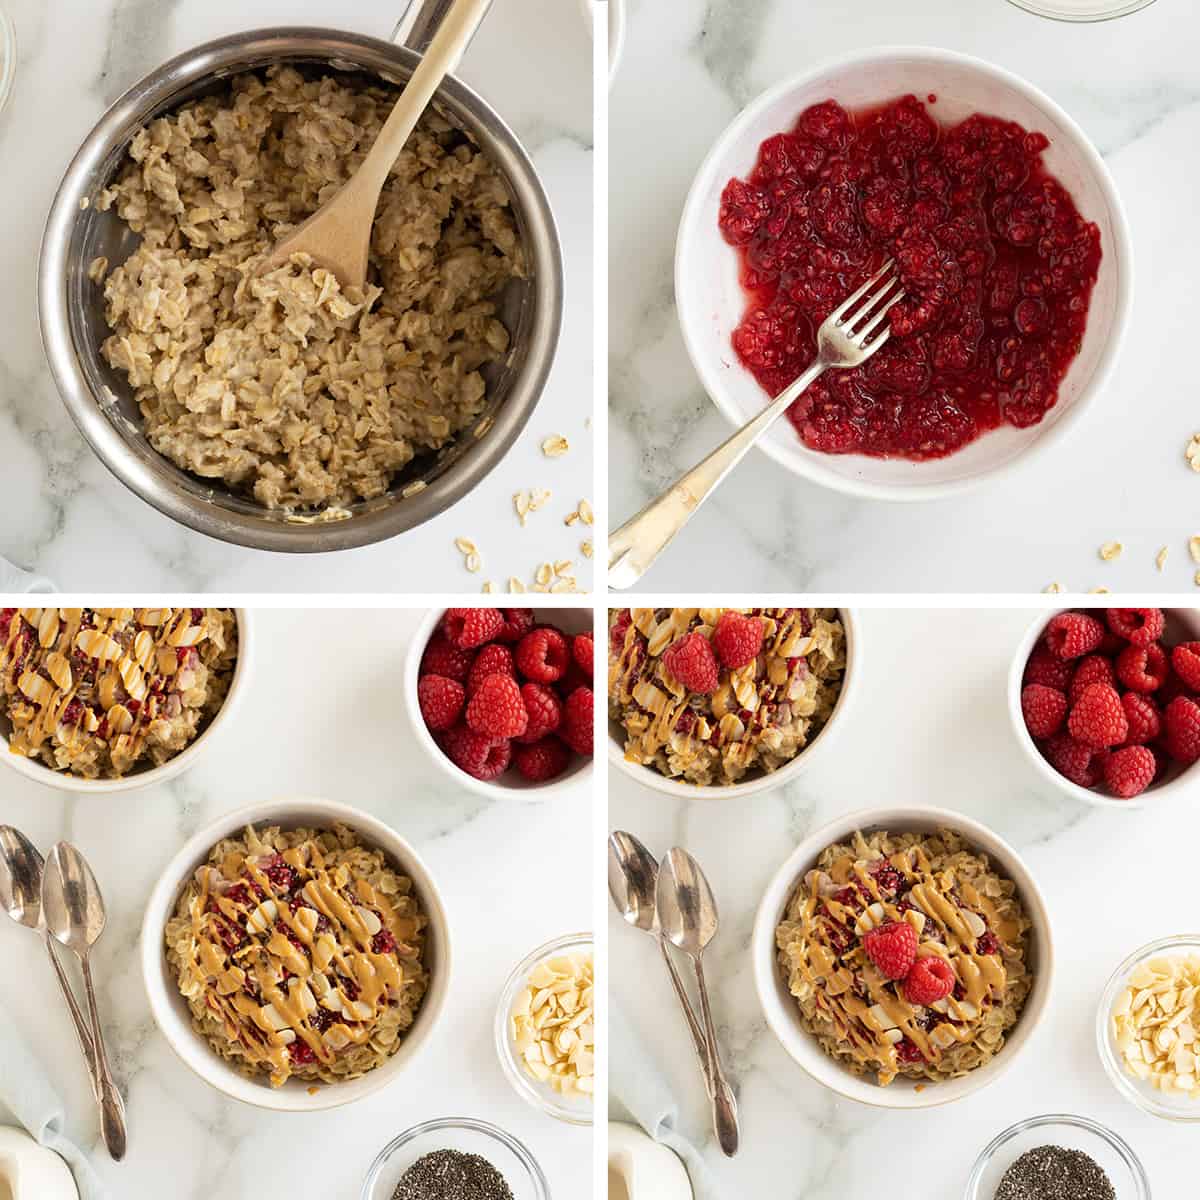 Four images of oatmeal cooking in a pot, mashed raspberries in a small bowl, and oatmeal with melted peanut butter and raspberries in a serving bowl.